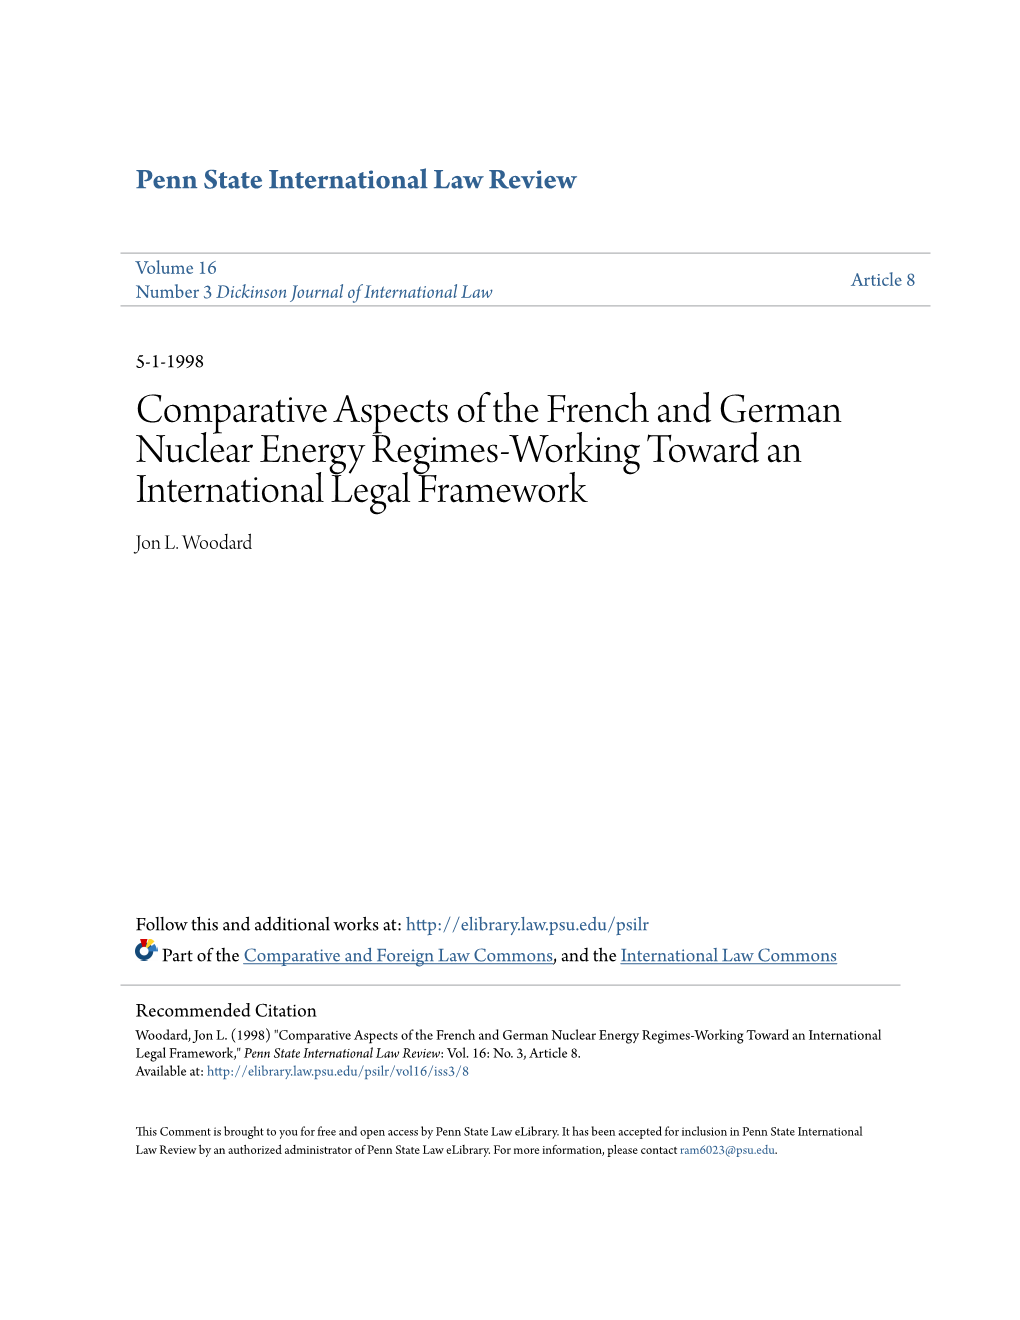 Comparative Aspects of the French and German Nuclear Energy Regimes-Working Toward an International Legal Framework Jon L